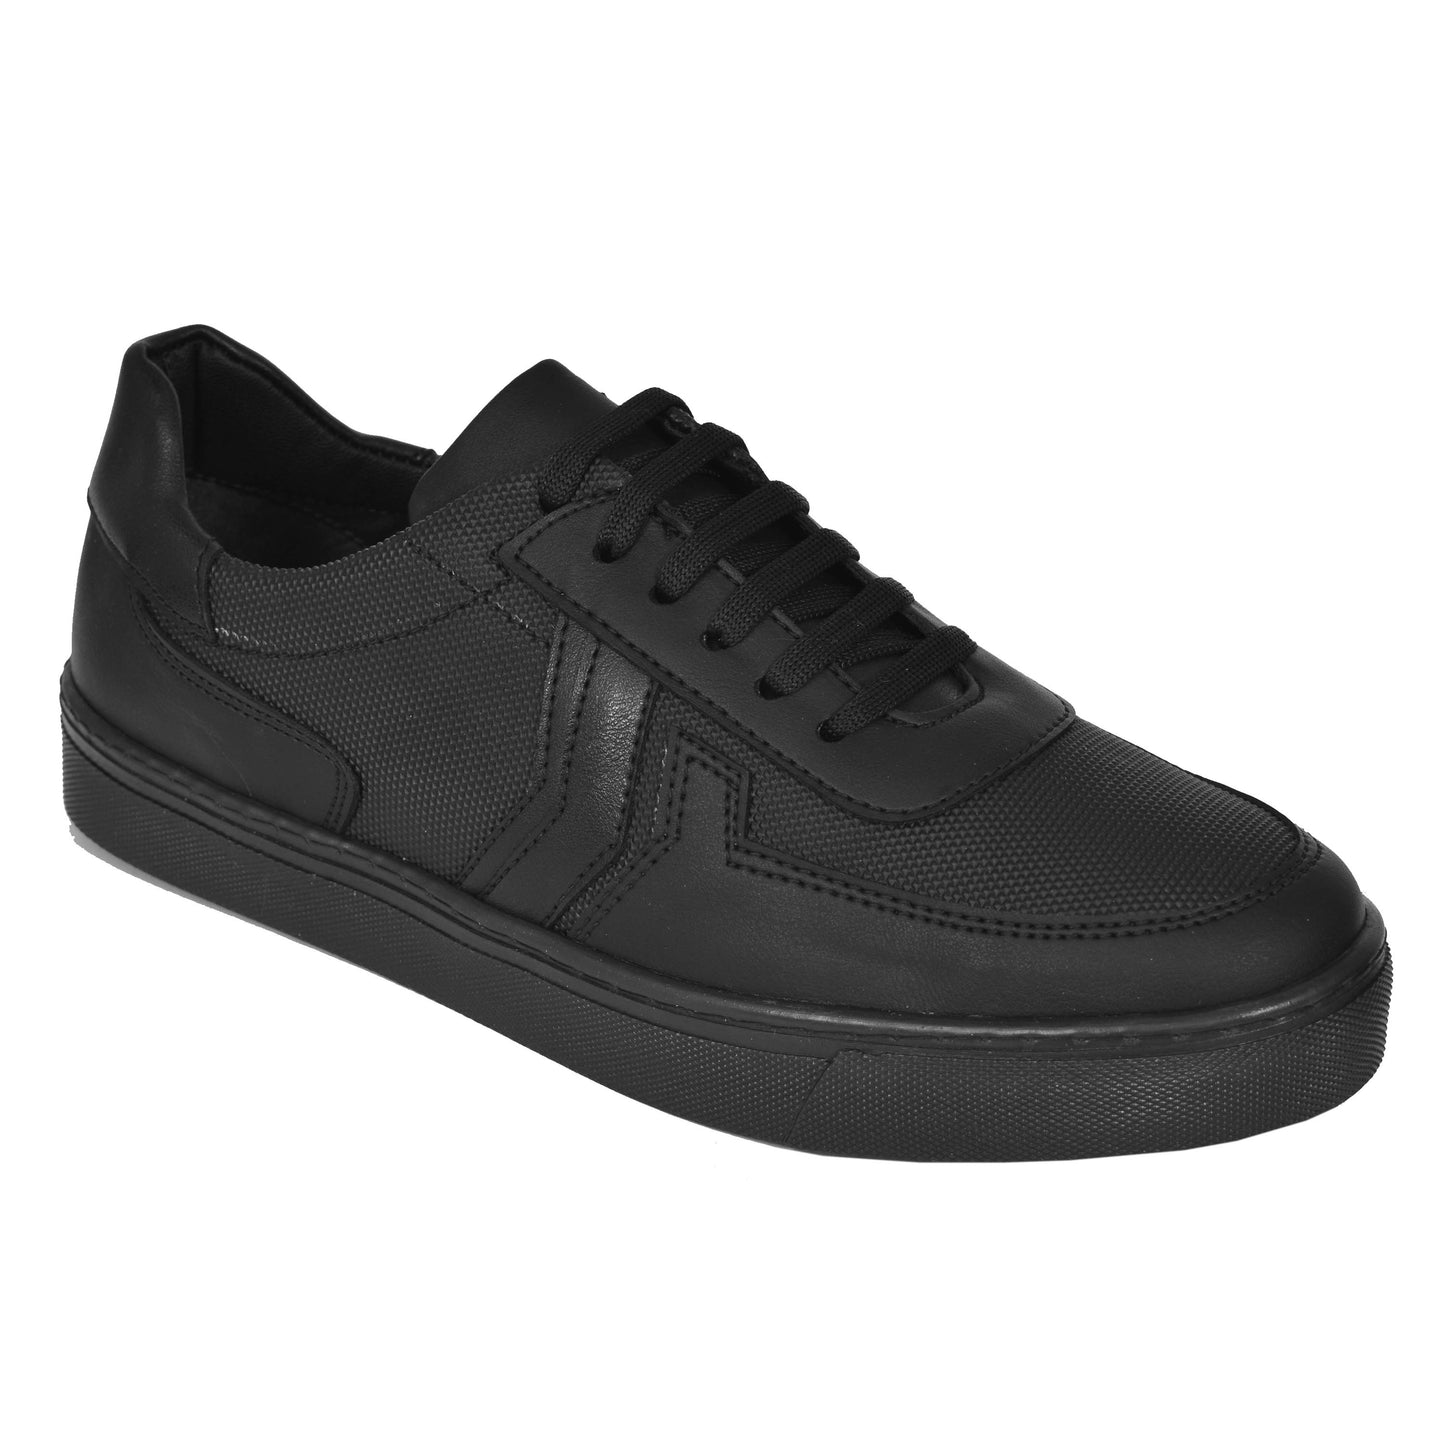 2H #9508 Black Casual Shoes